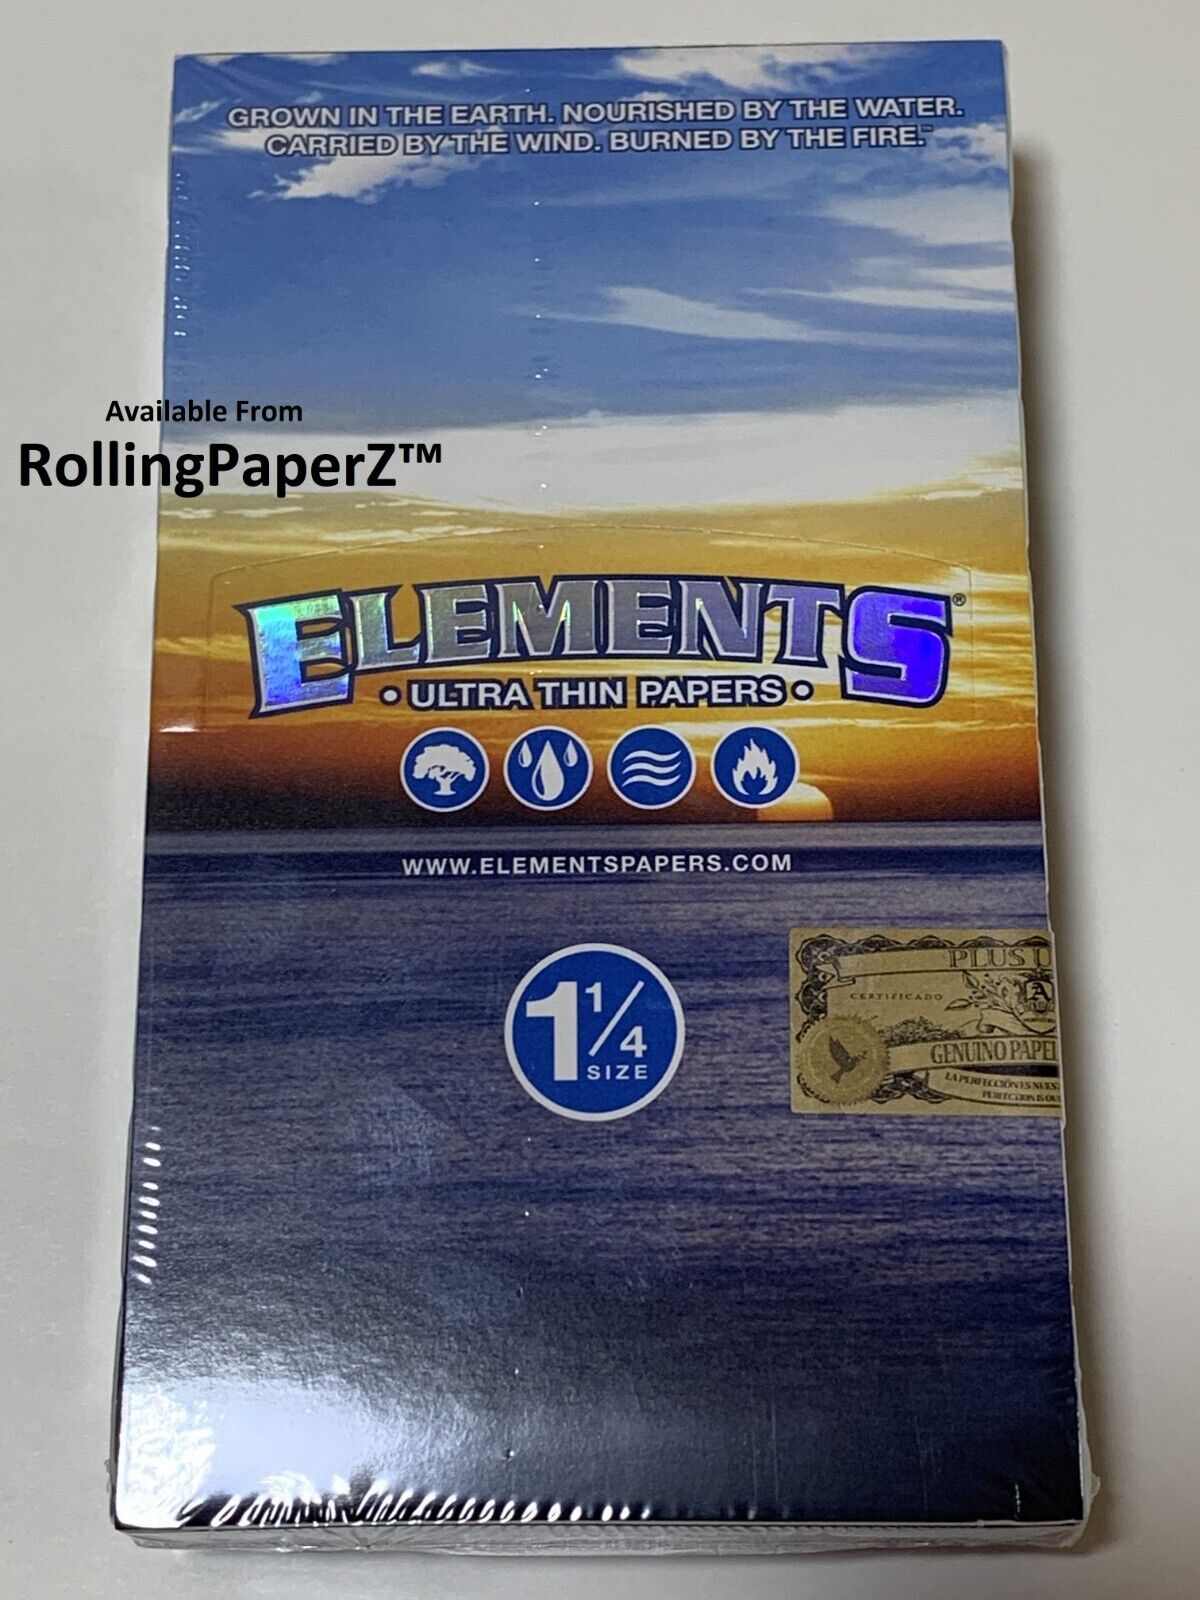 NEW Sealed BOX of 25 packs ELEMENTS 1 1/4 1.25 Ultra-Thin Rolling papers